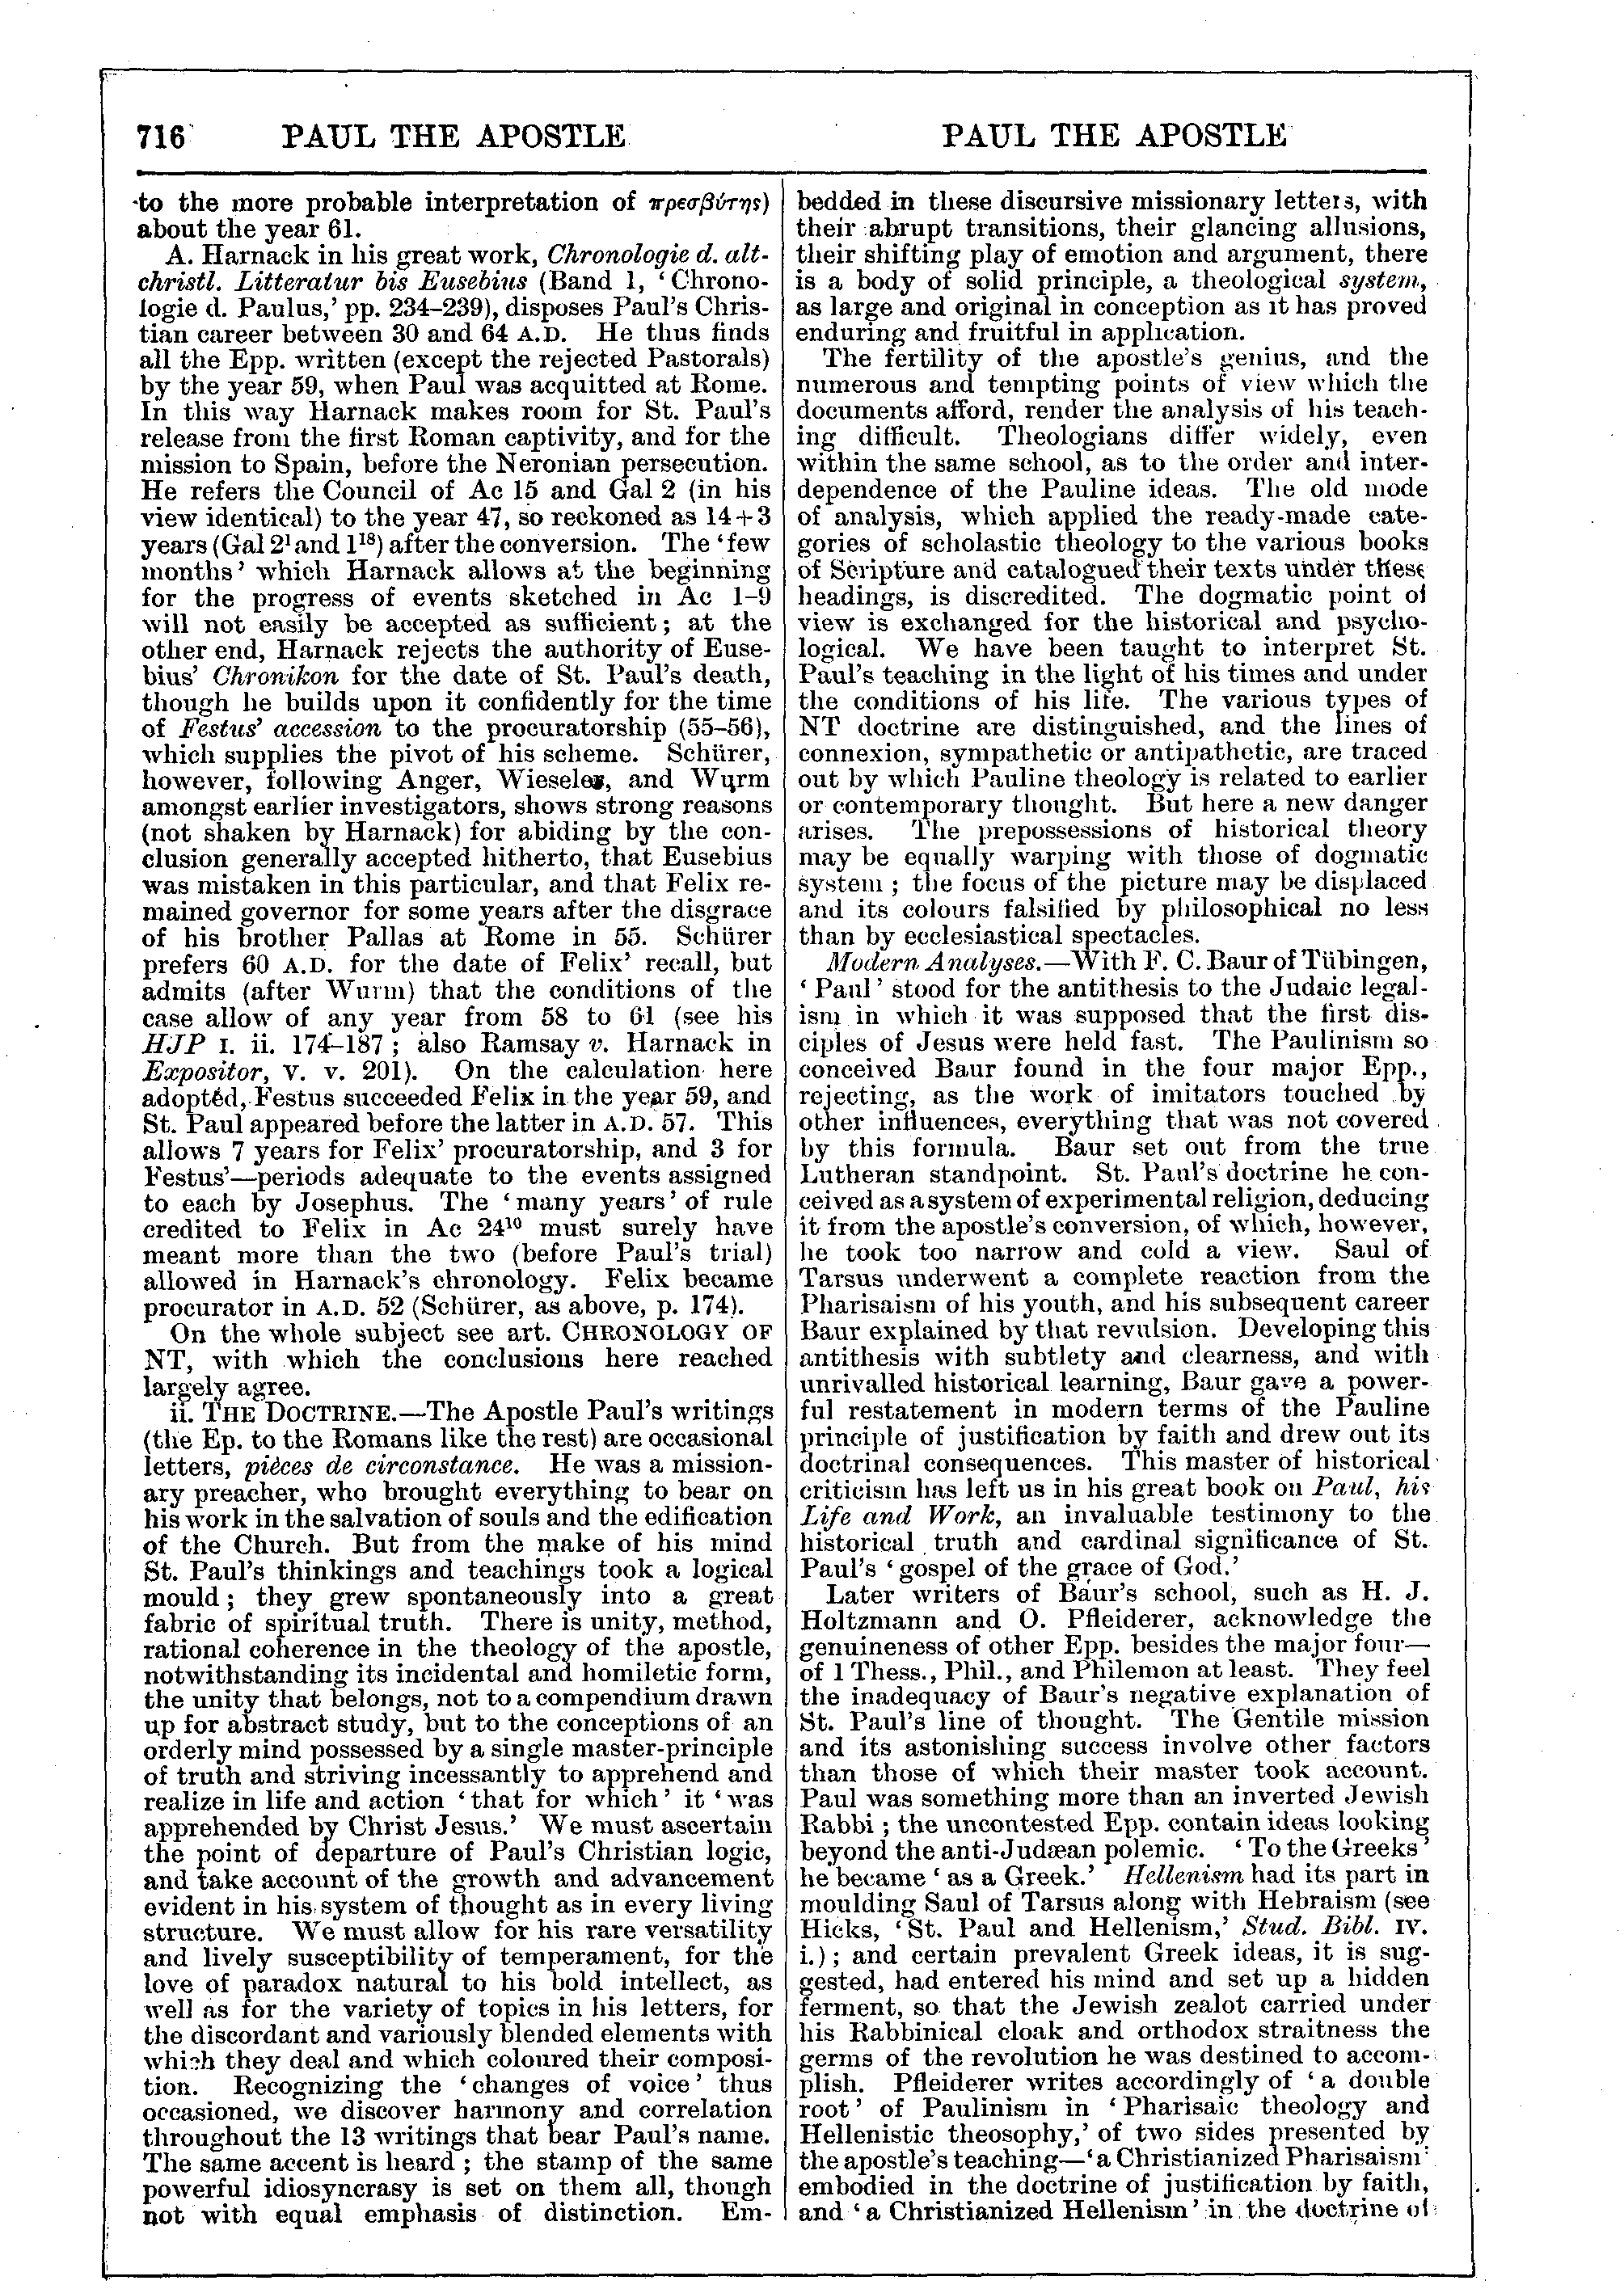 Image of page 716